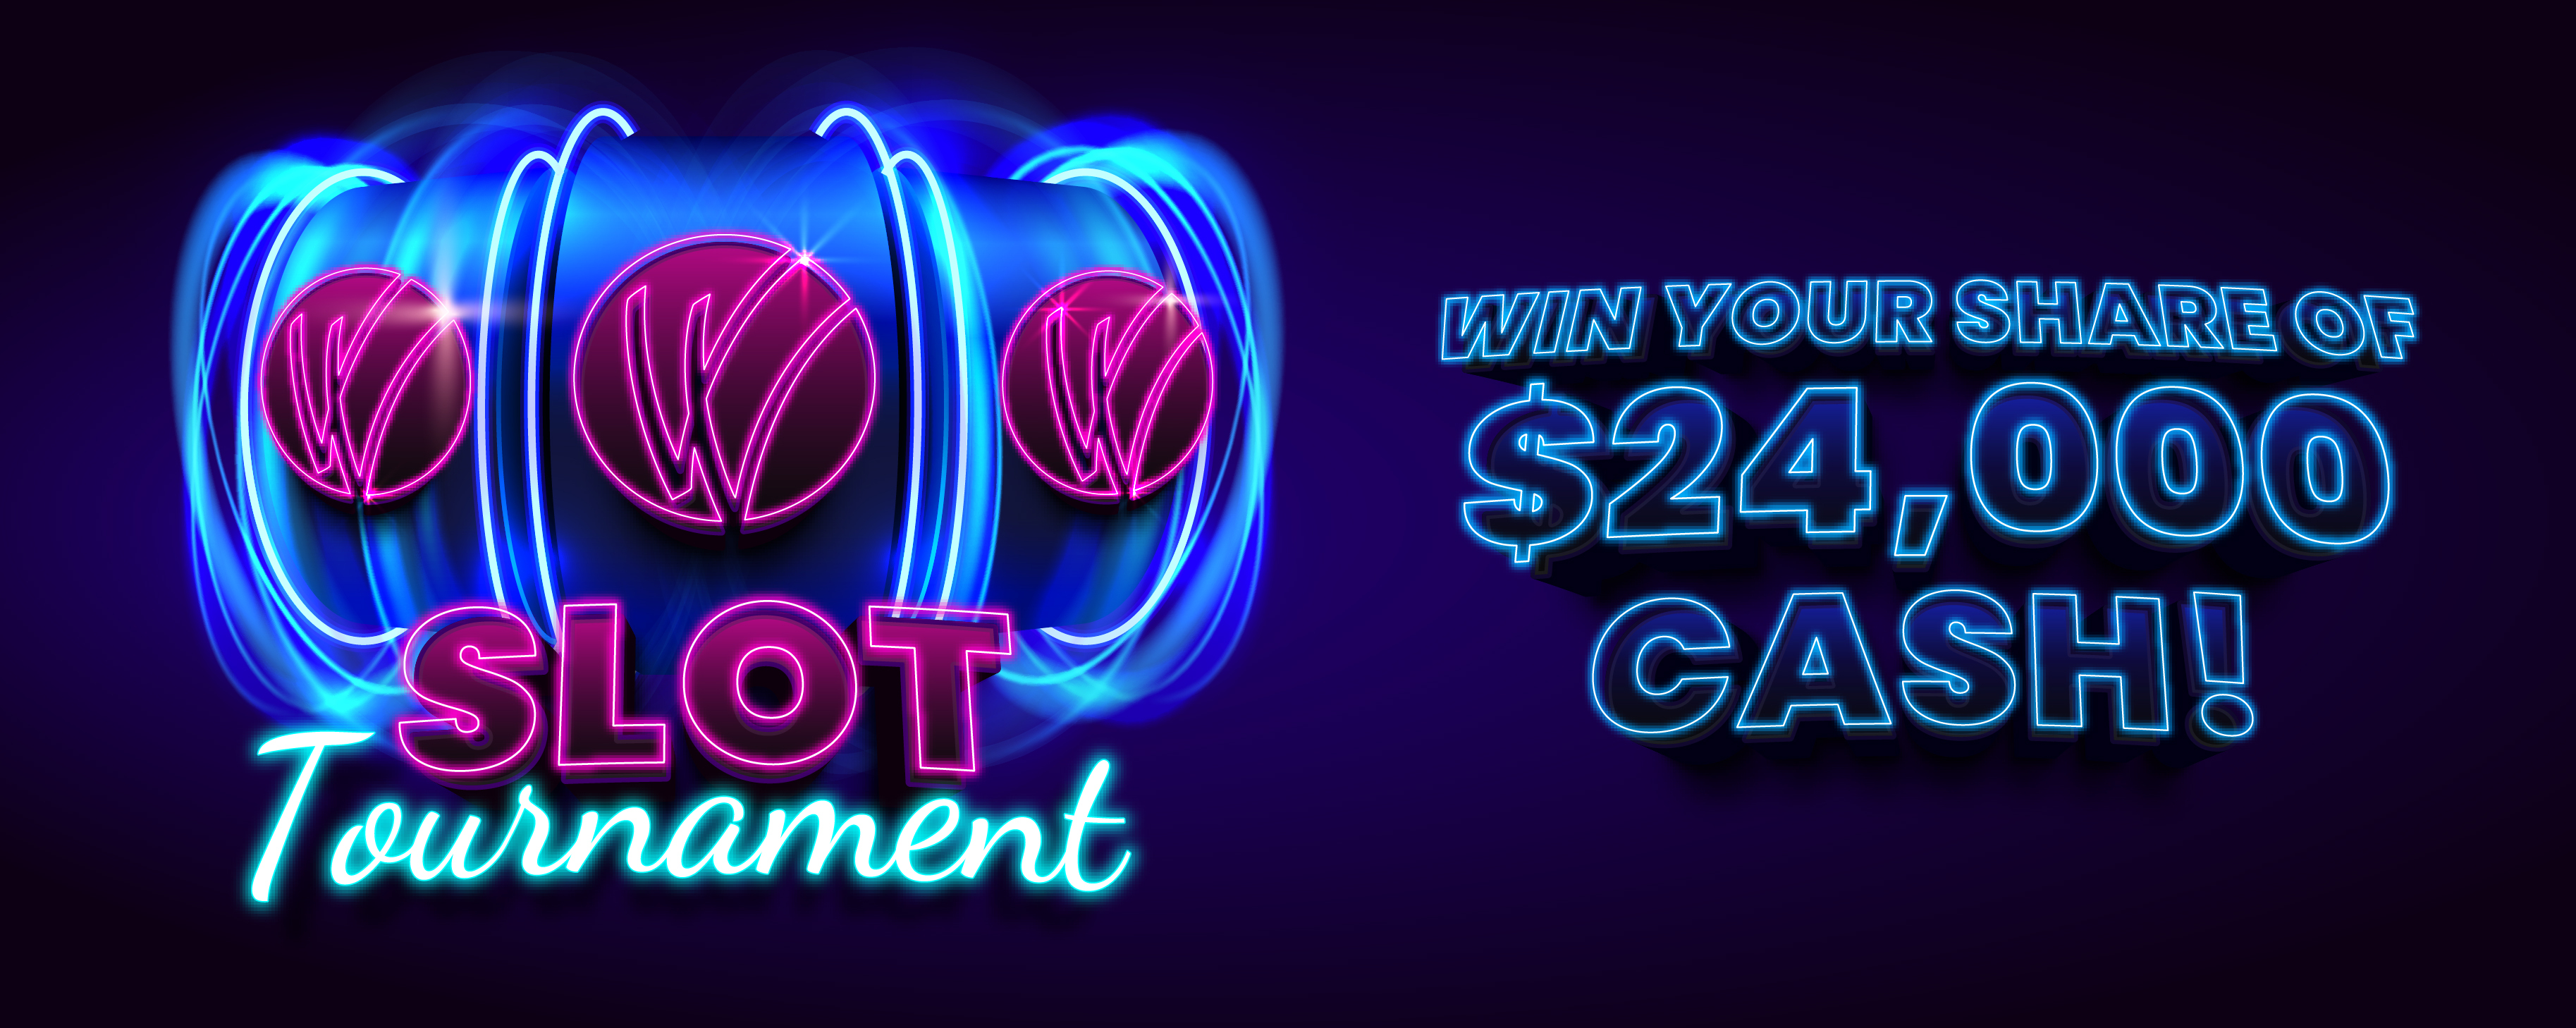 Slot tournament! Win your share of $24,000 cash!